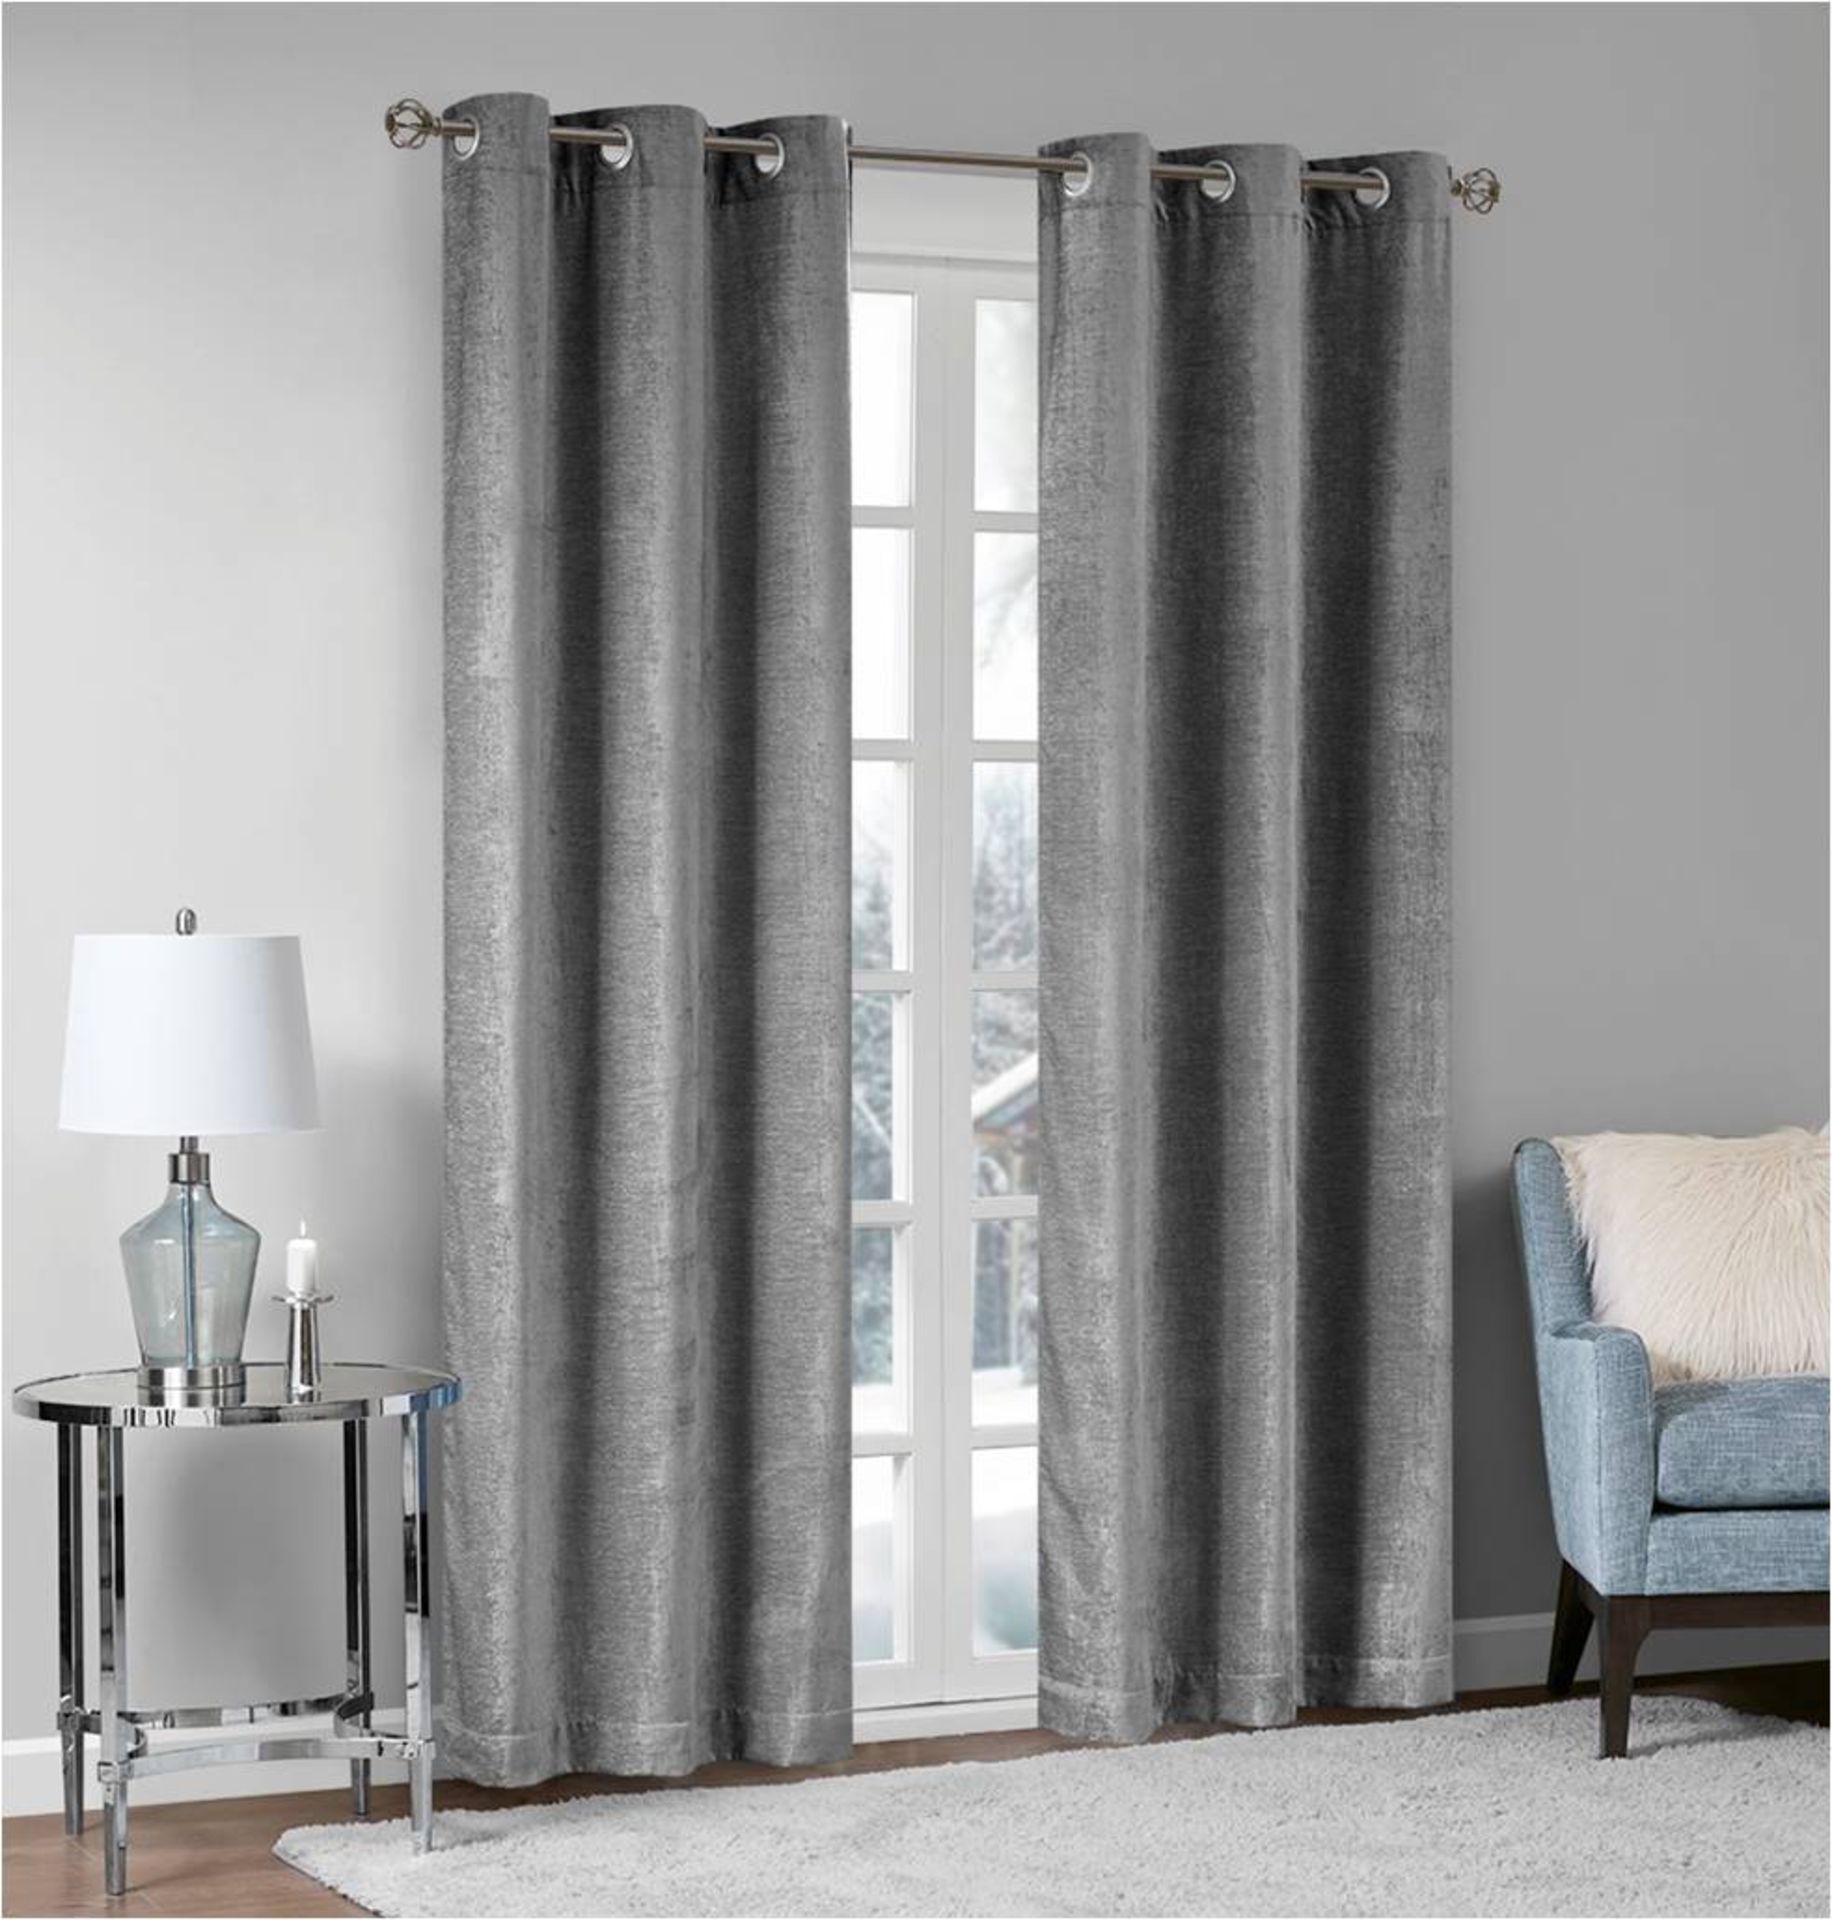 1 x Set of Madison Park Palazzo Chenille Grey Curtains 90x90" - Product Code MP40-0192UK (Brand